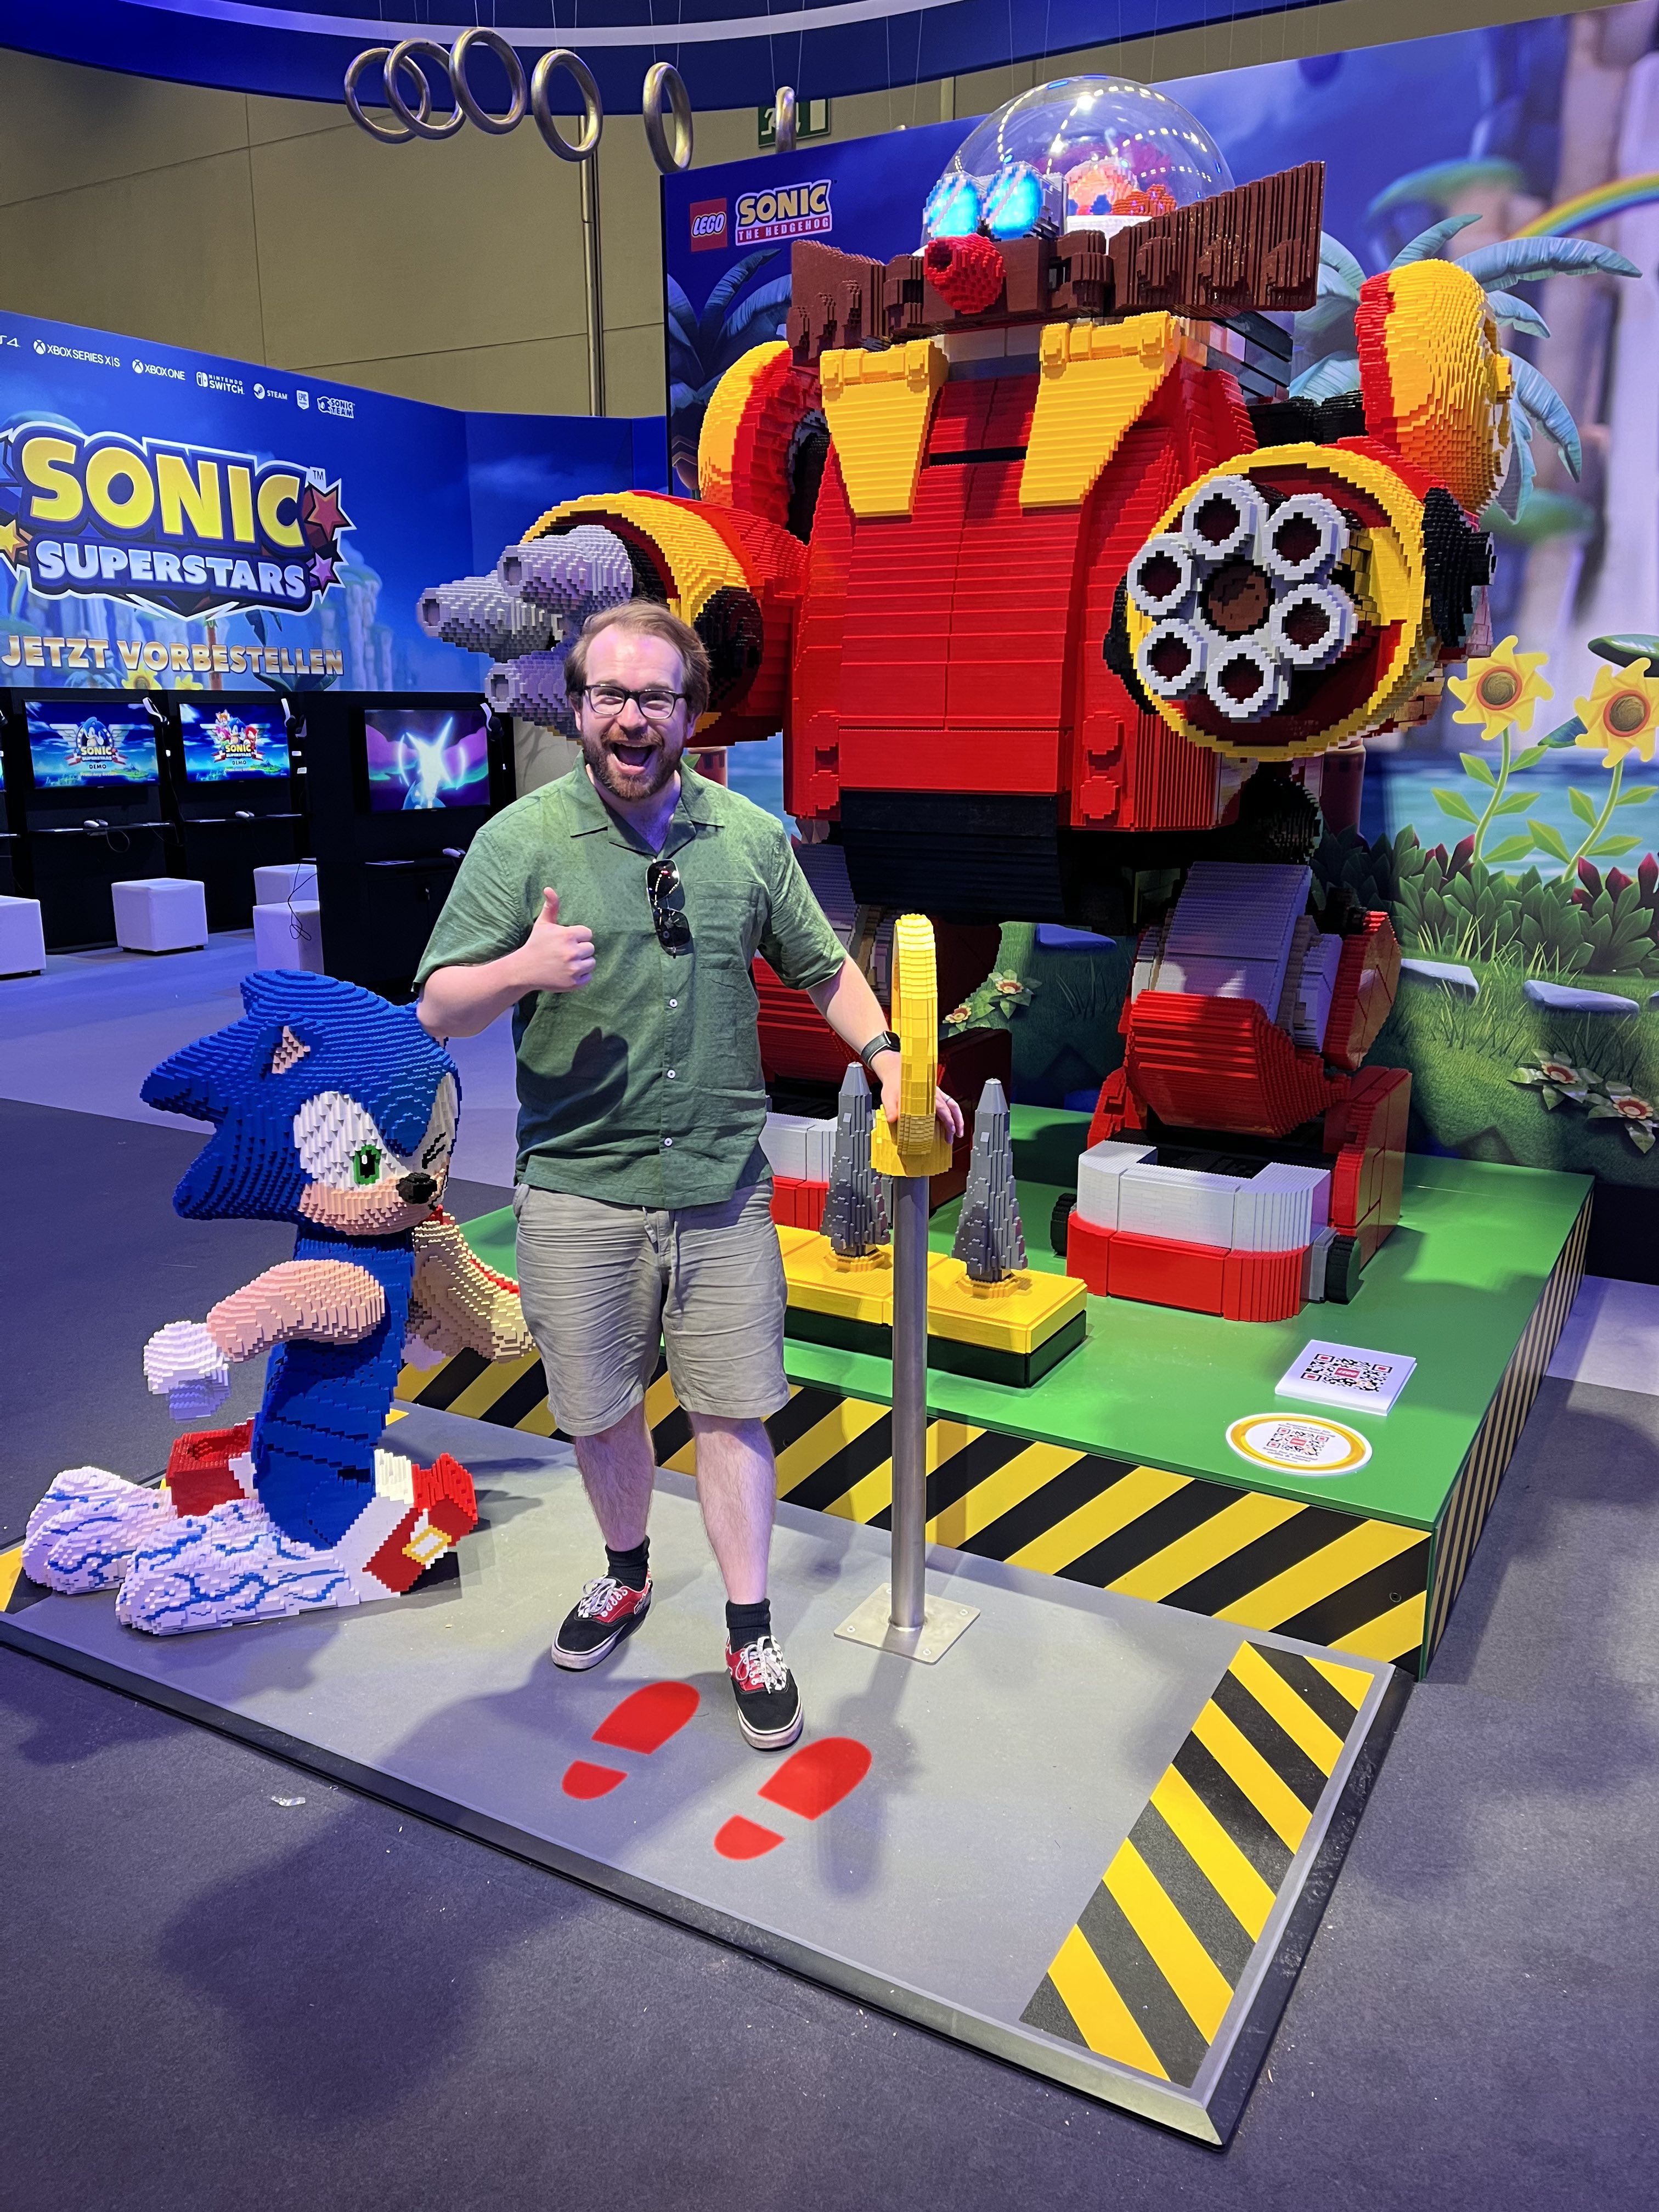 Life-Sized LEGO Sonic and Dr. Eggman Sculptures Arrive at Gamescom